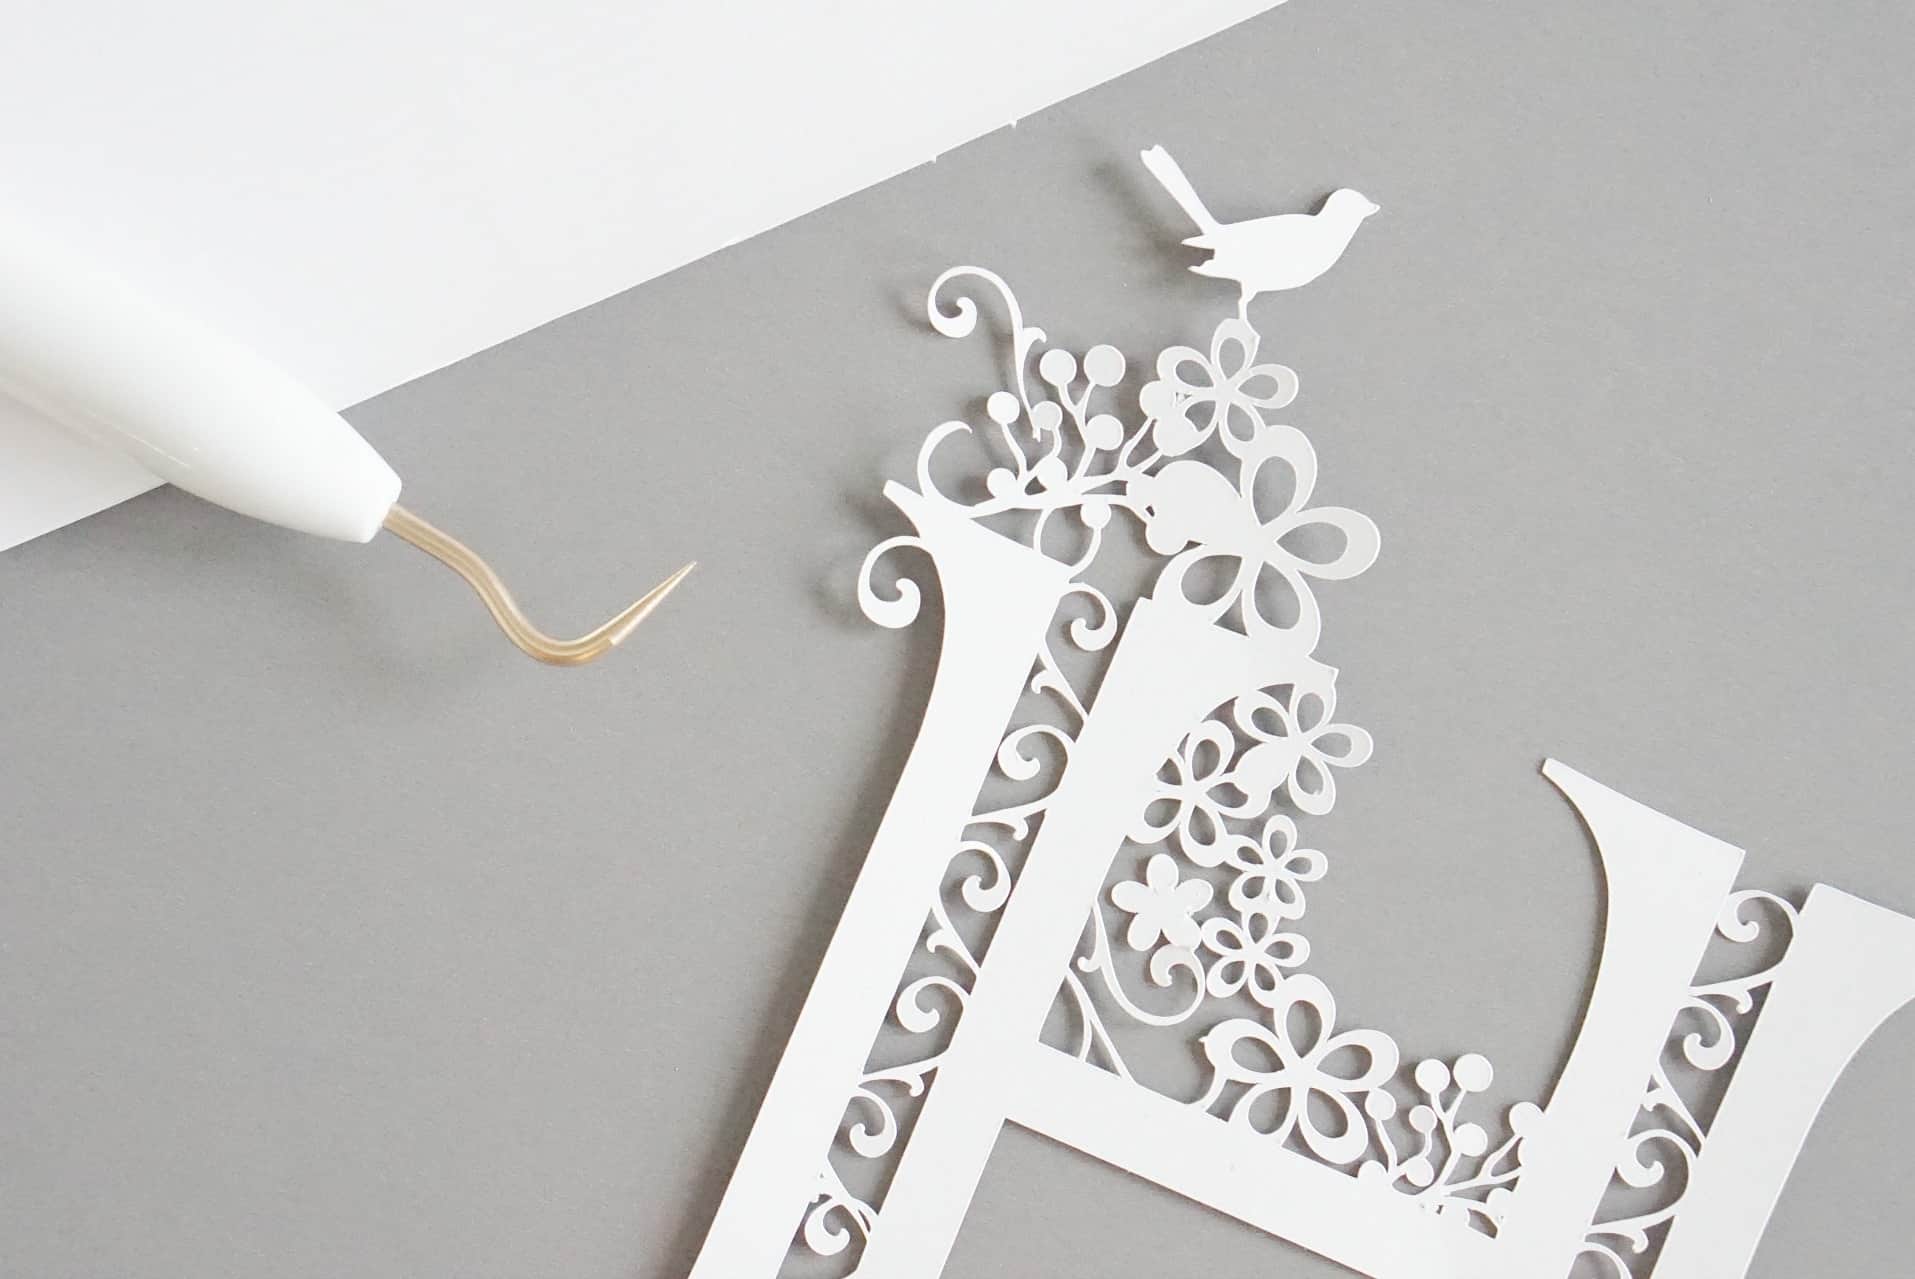 Cricut Paper Cutting Art Projects And Tutorials ⋆ Extraordinary Chaos